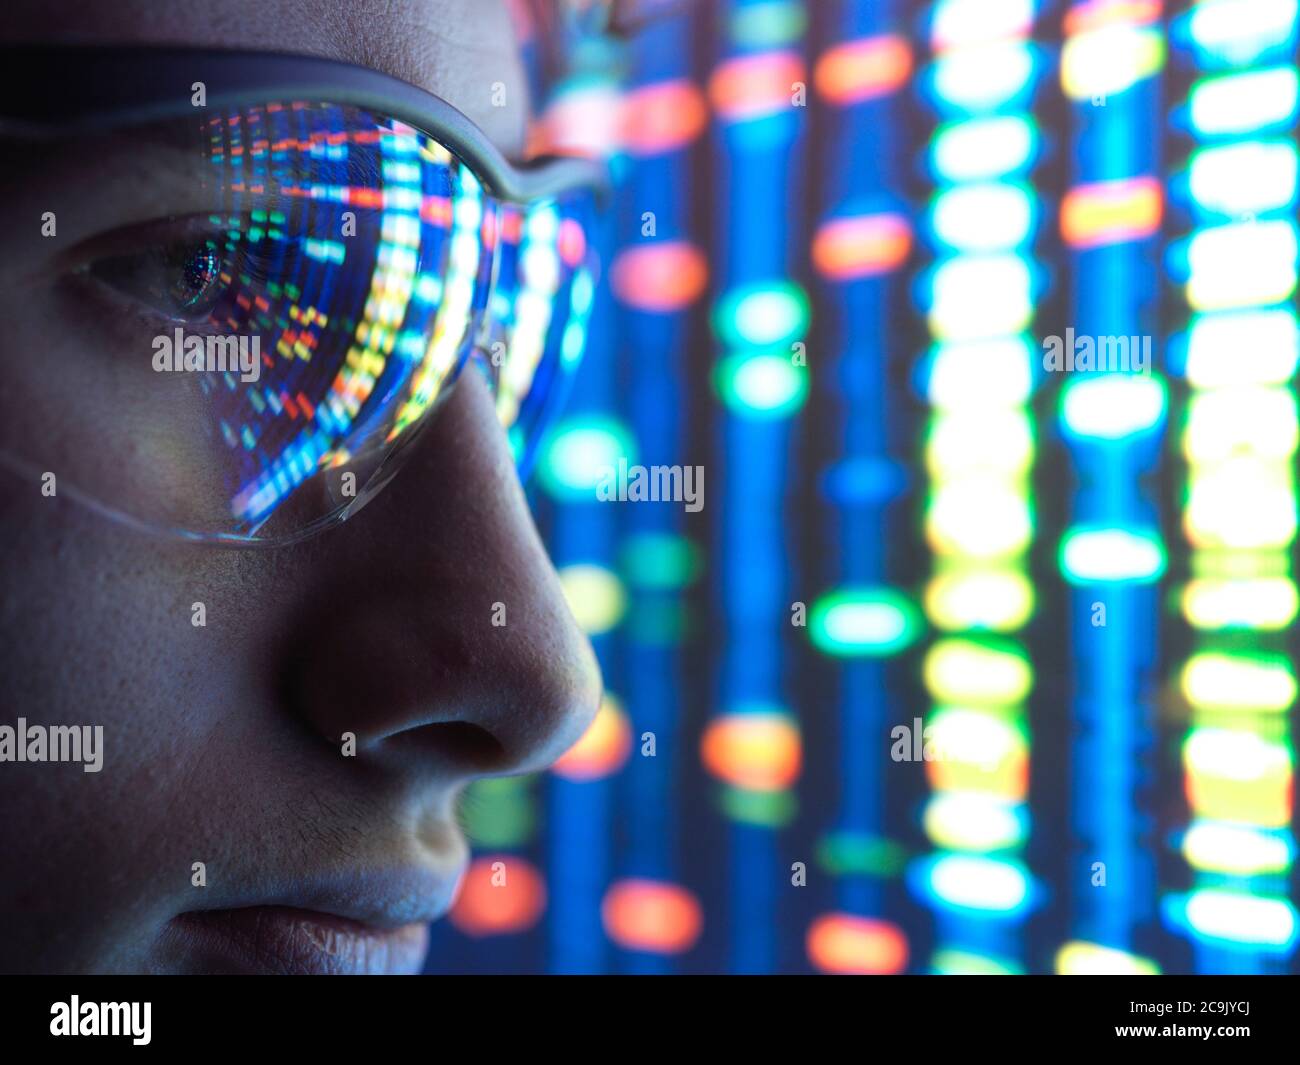 Scientist viewing DNA (deoxyribonucleic acid) profiles. Stock Photo